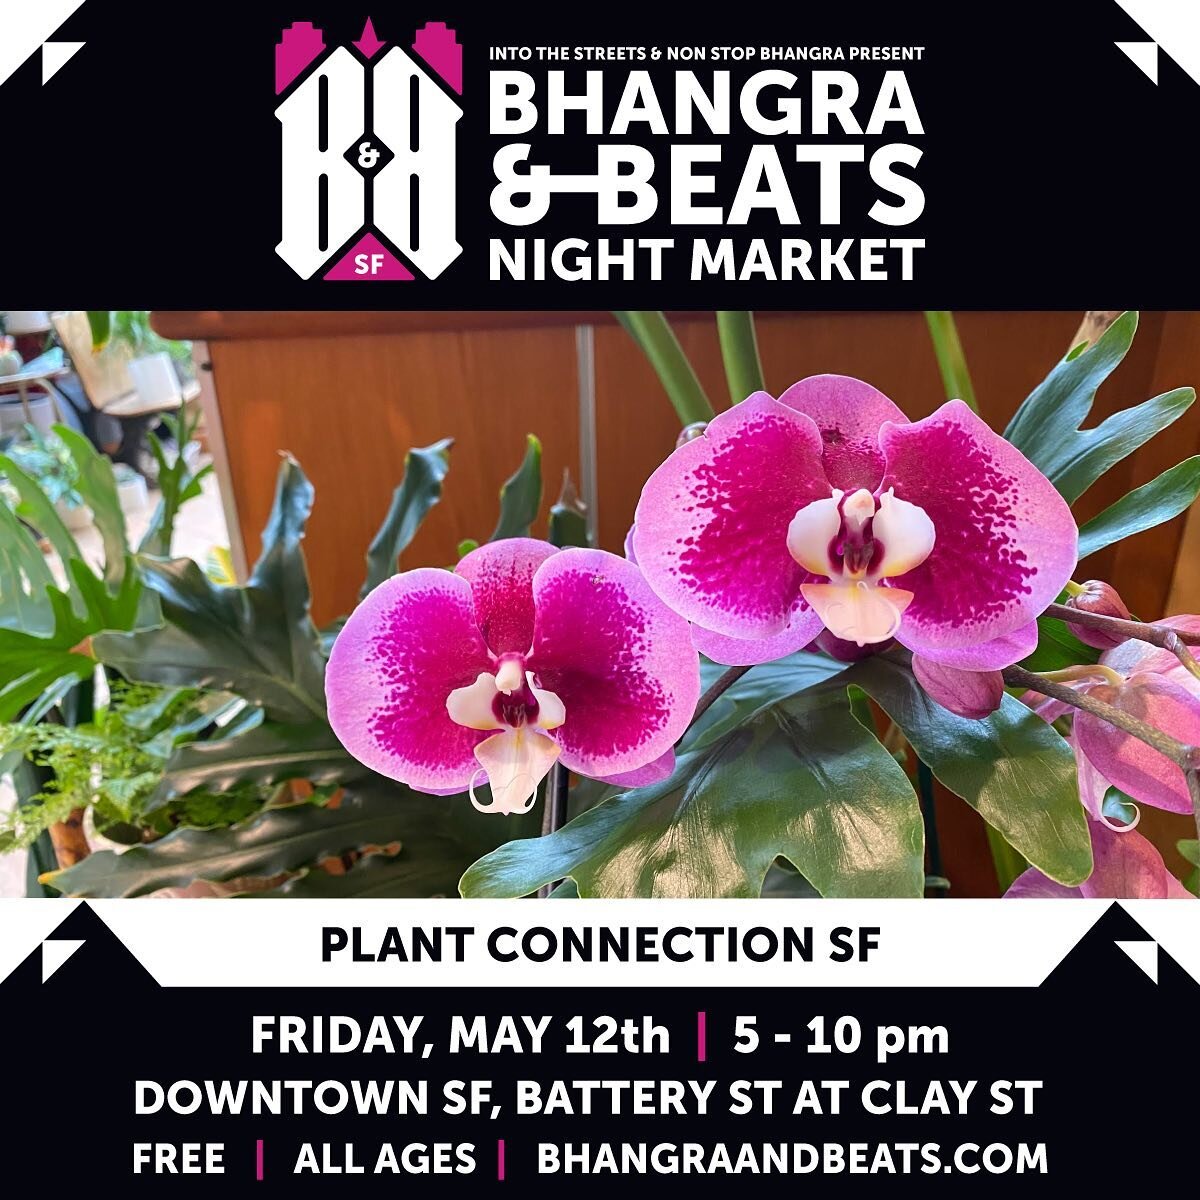 Plant Connection SF is excited to announce that we&rsquo;ll be selling at Bhangra &amp; Beats Night Market. Come enjoy the DJs, the dancers, the food trucks and come by to see us at our booth to take home a plant. It&rsquo;s a fantastic way to suppor